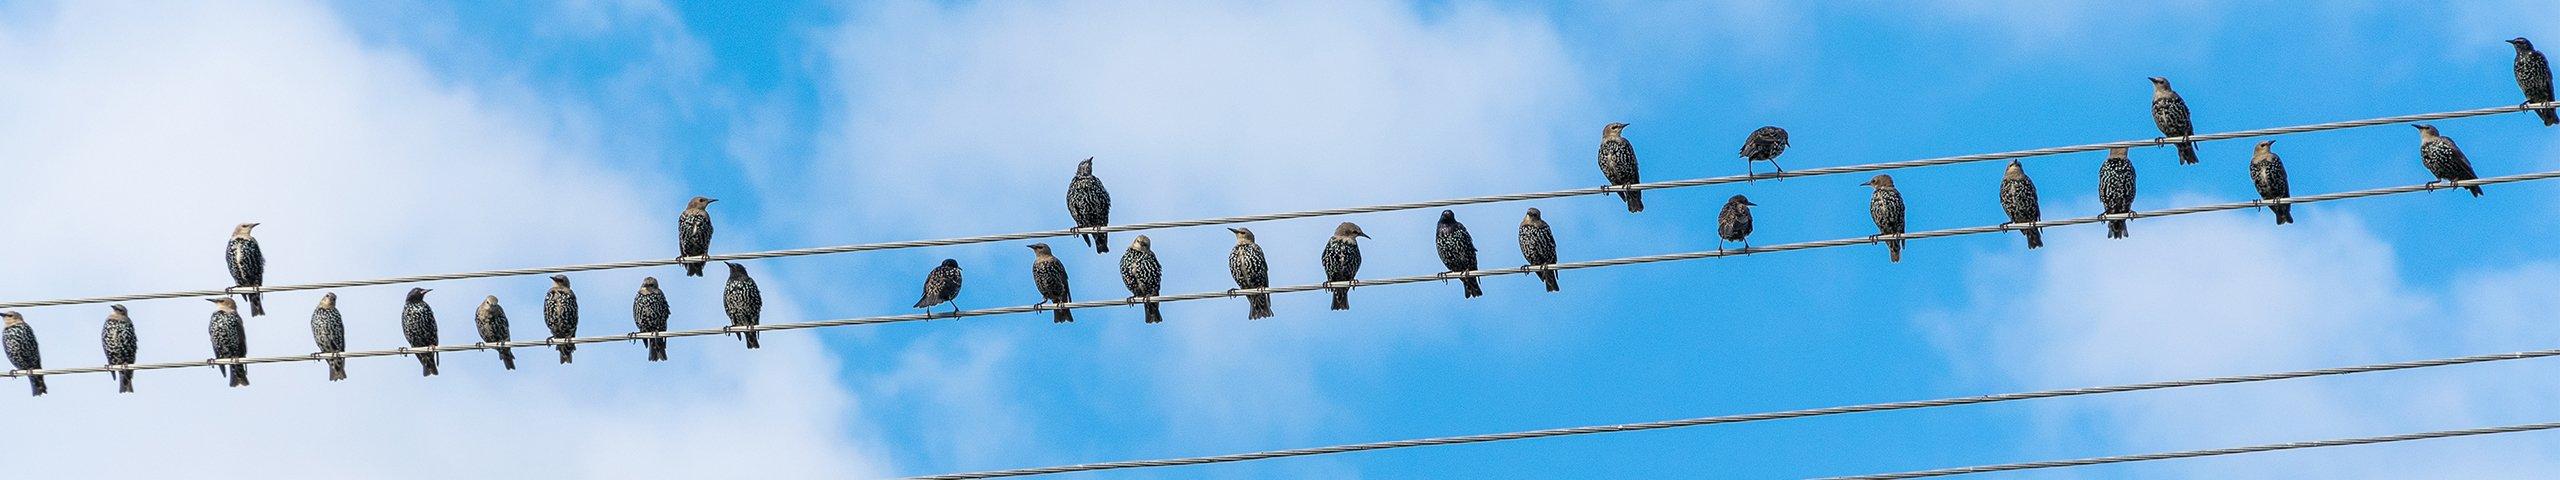 starlings perched on telephone wires